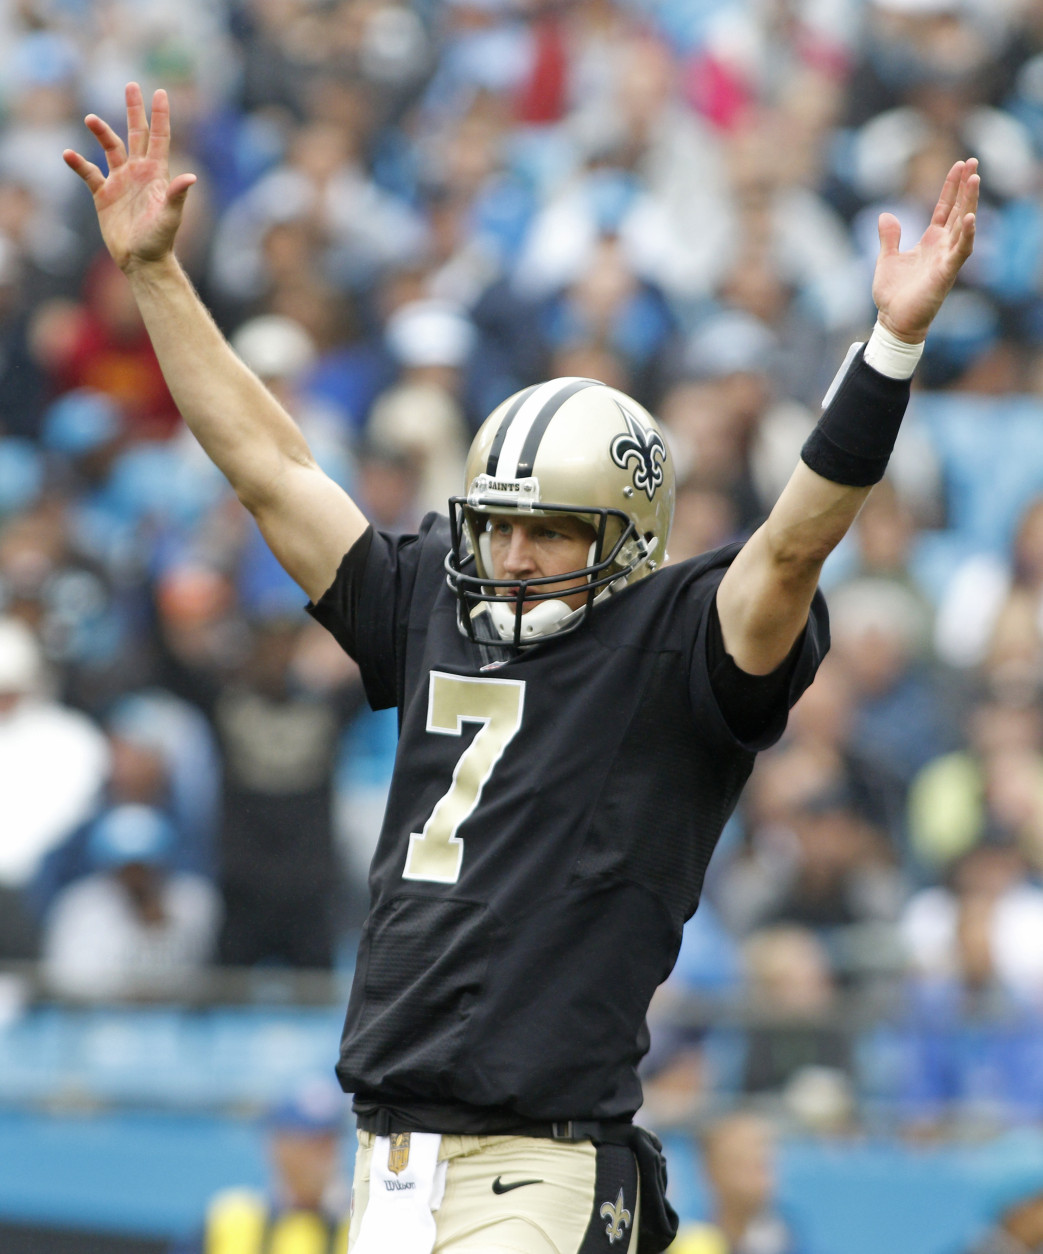 New Orleans Saints' Luke McCown (7) celebrates a touchdown against the Carolina Panthers in the first half of an NFL football game in Charlotte, N.C., Sunday, Sept. 27, 2015. (AP Photo/Bob Leverone)